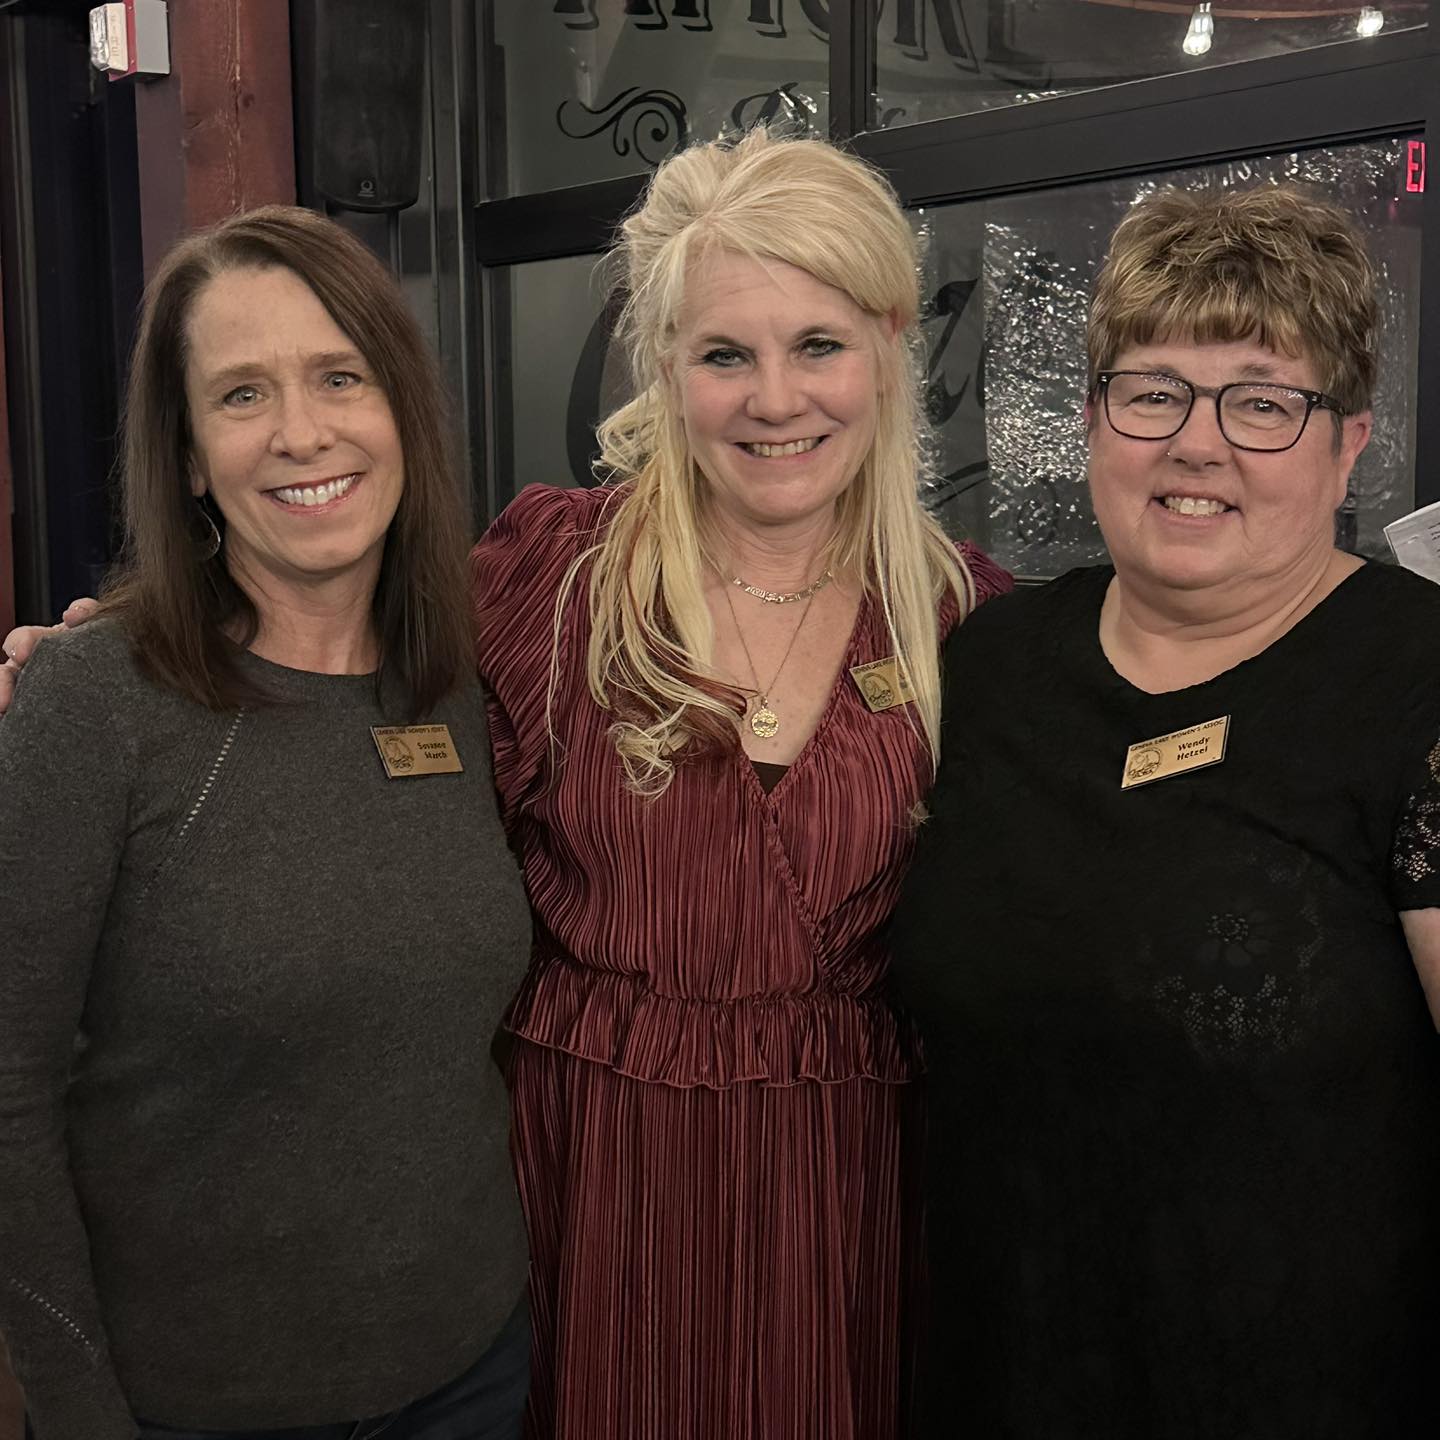 Last night we welcomed two new members to our group. Susie M. & Wendy H. We are so happy to have you! Oakfire Pizza provided us a great meeting space with some delicious food. Thank you everyone who joined us for our February meeting.